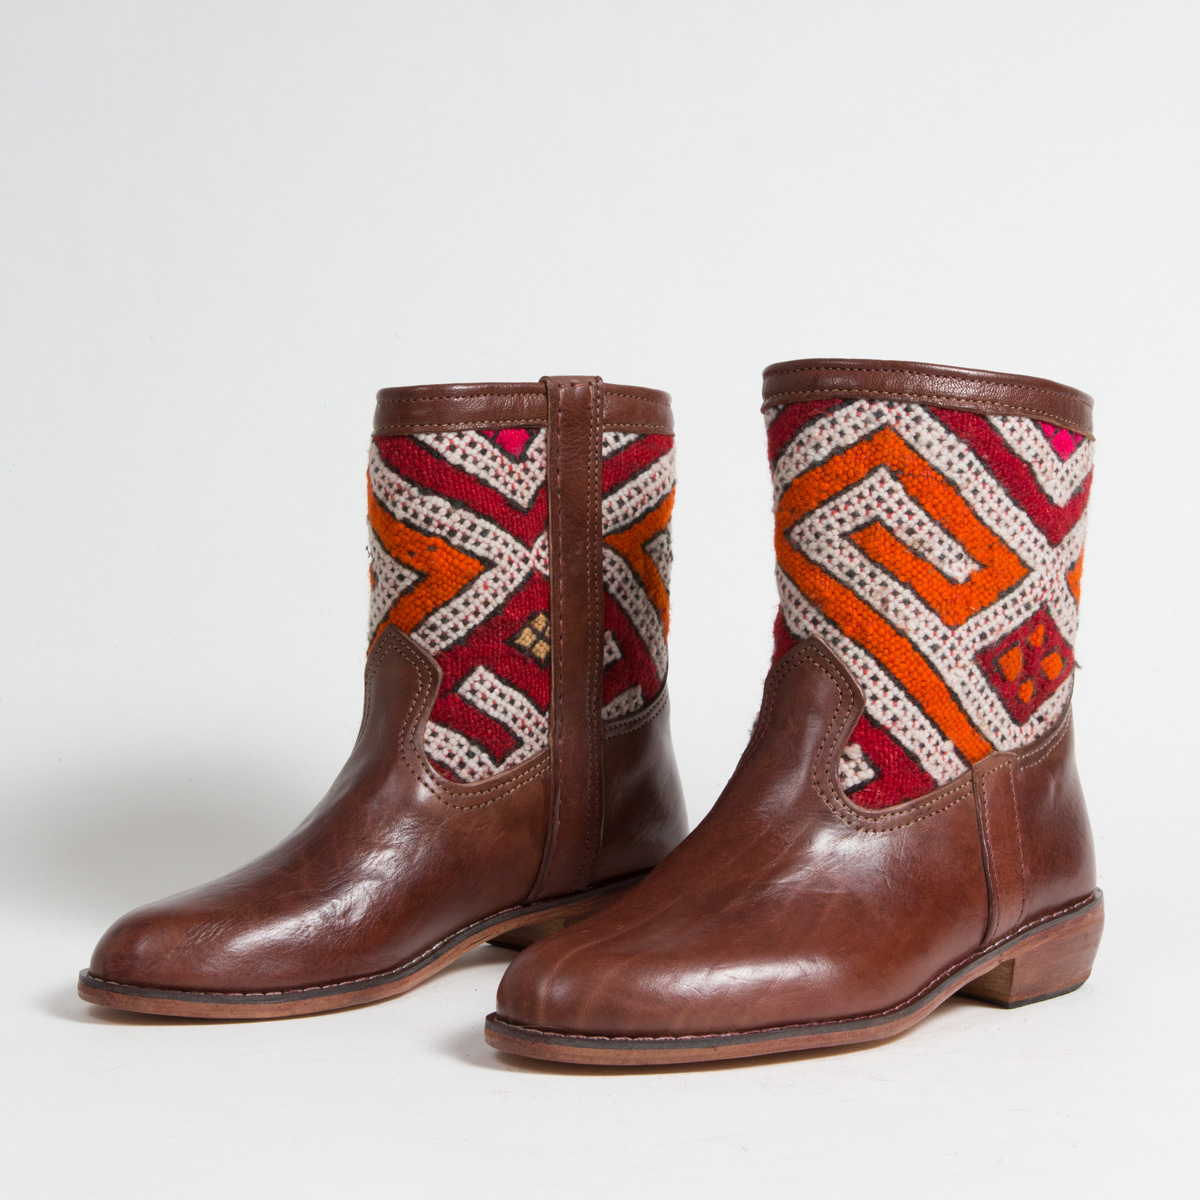 Bottines Kilim cuir mababouche artisanales (Réf. CB3-39)